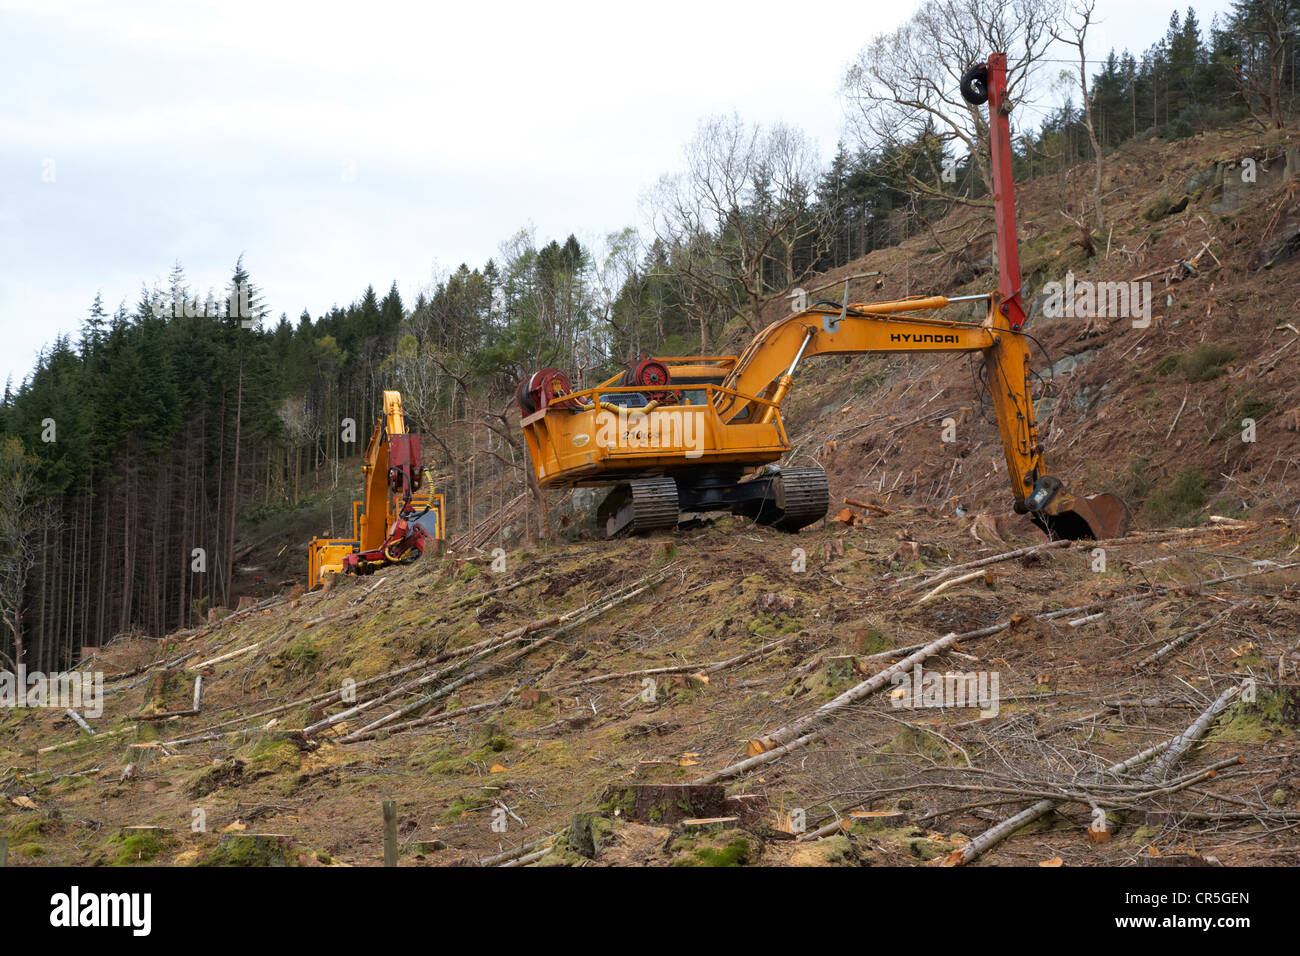 jcbs and heavy equipment cutting down trees in a forest in the highlands of scotland uk Stock Photo